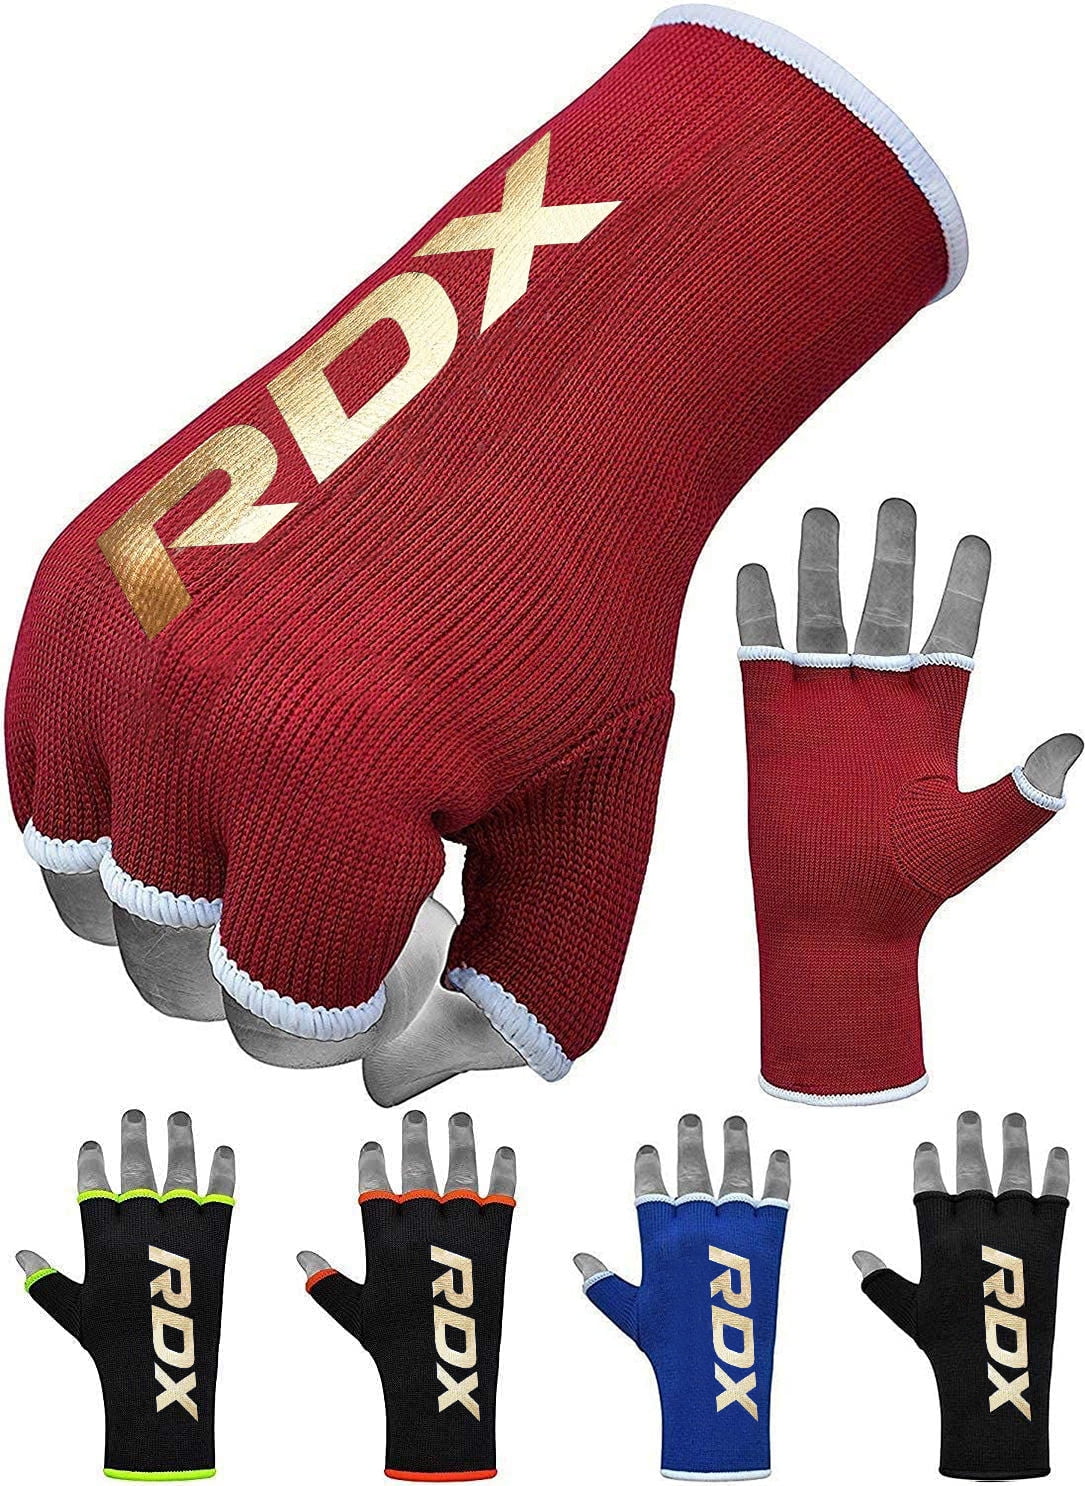 RDX MMA Boxing 3 Pairs Hand Wraps Inner Glove Fist Protector Muay Thai Bandages 